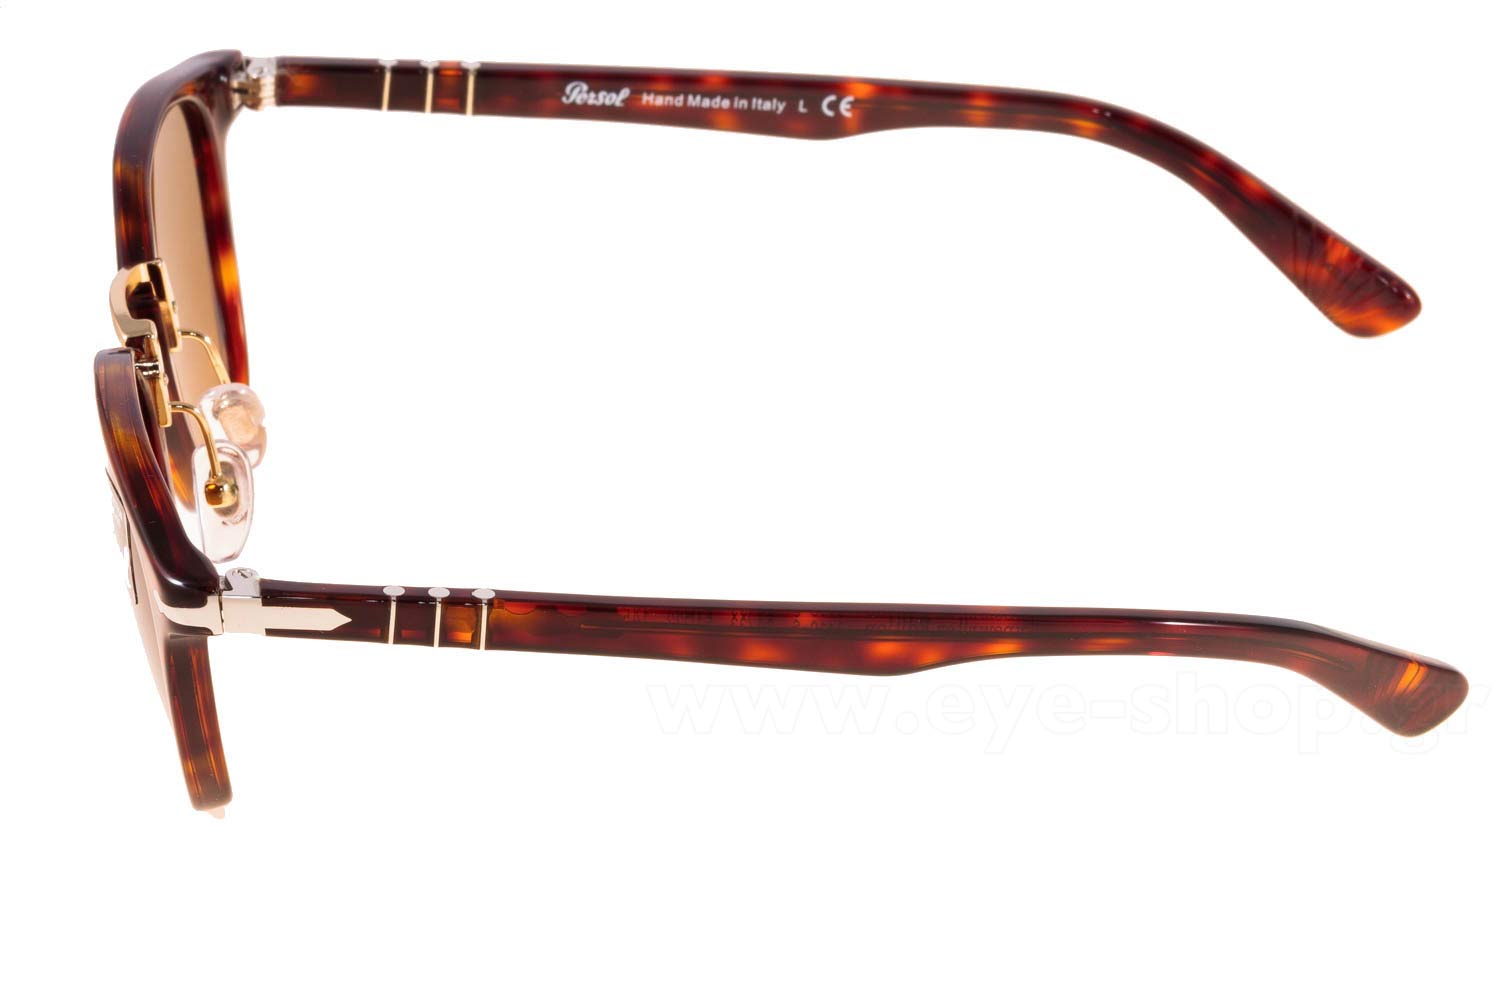 Persol 3110S